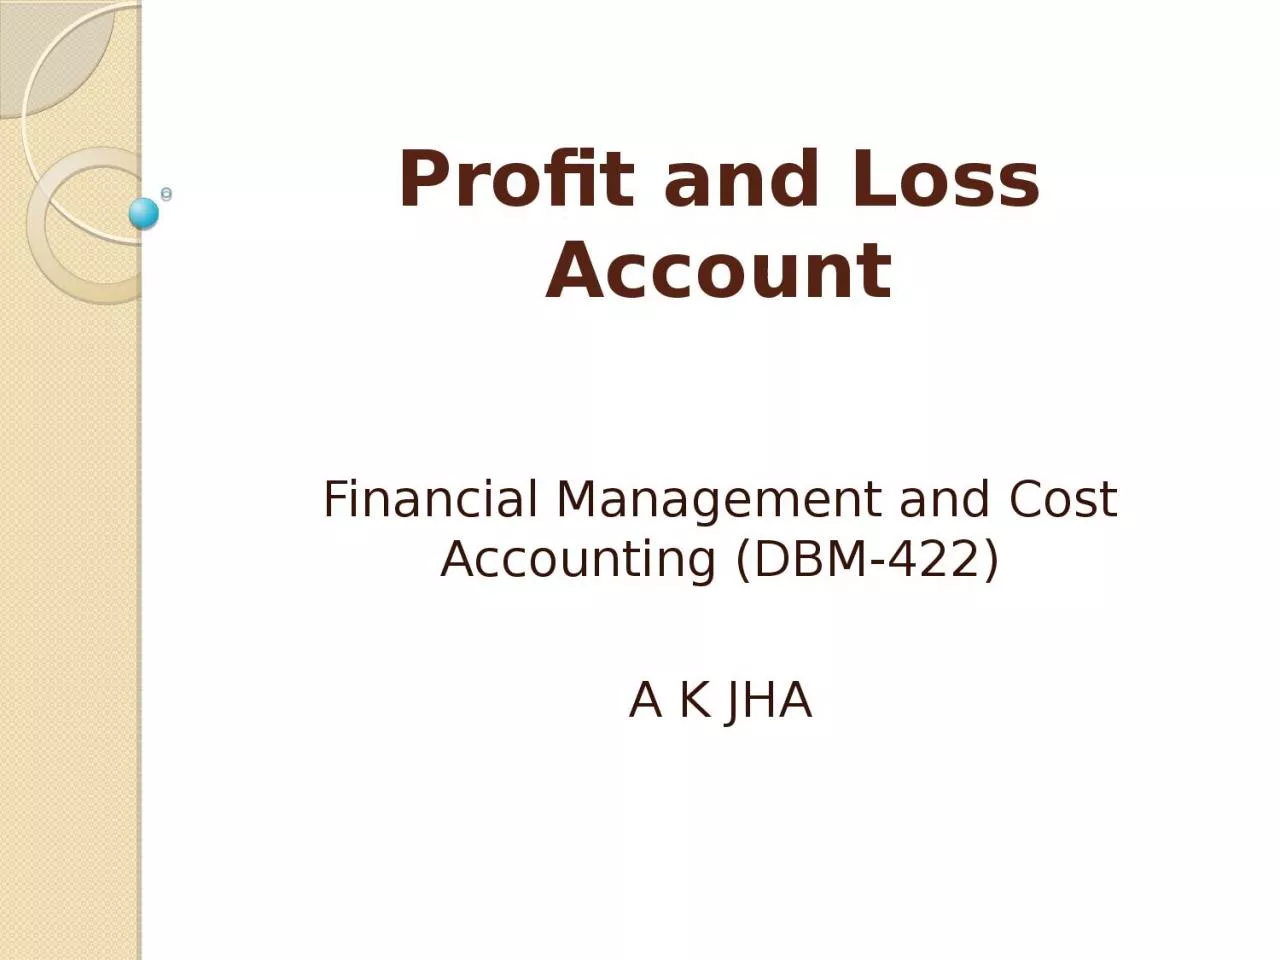 Profit and Loss Account Financial Management and Cost Accounting (DBM-422)